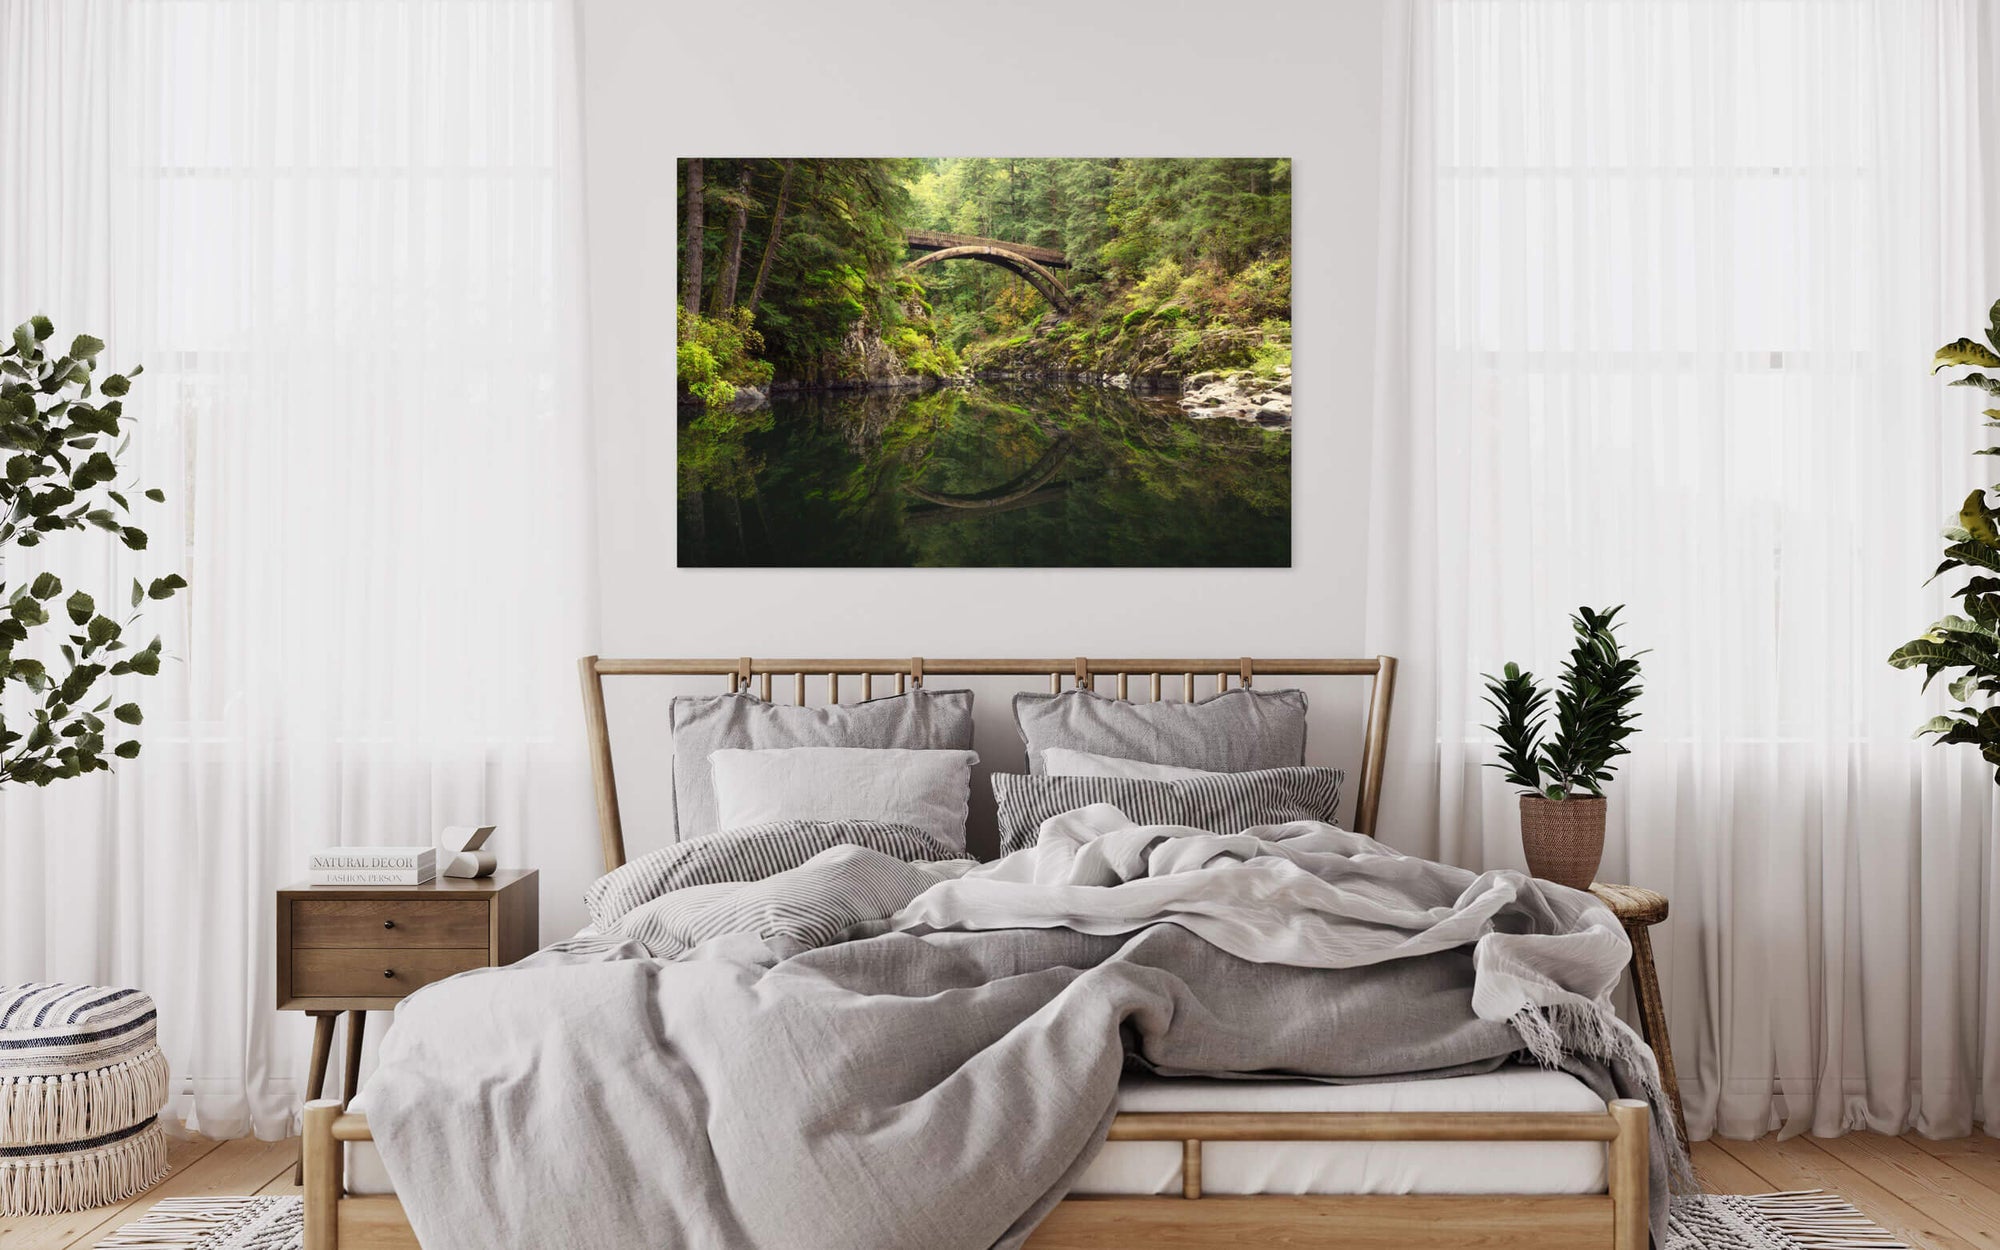 A Moulton Falls picture showing the first fall colors hangs in a bedroom.